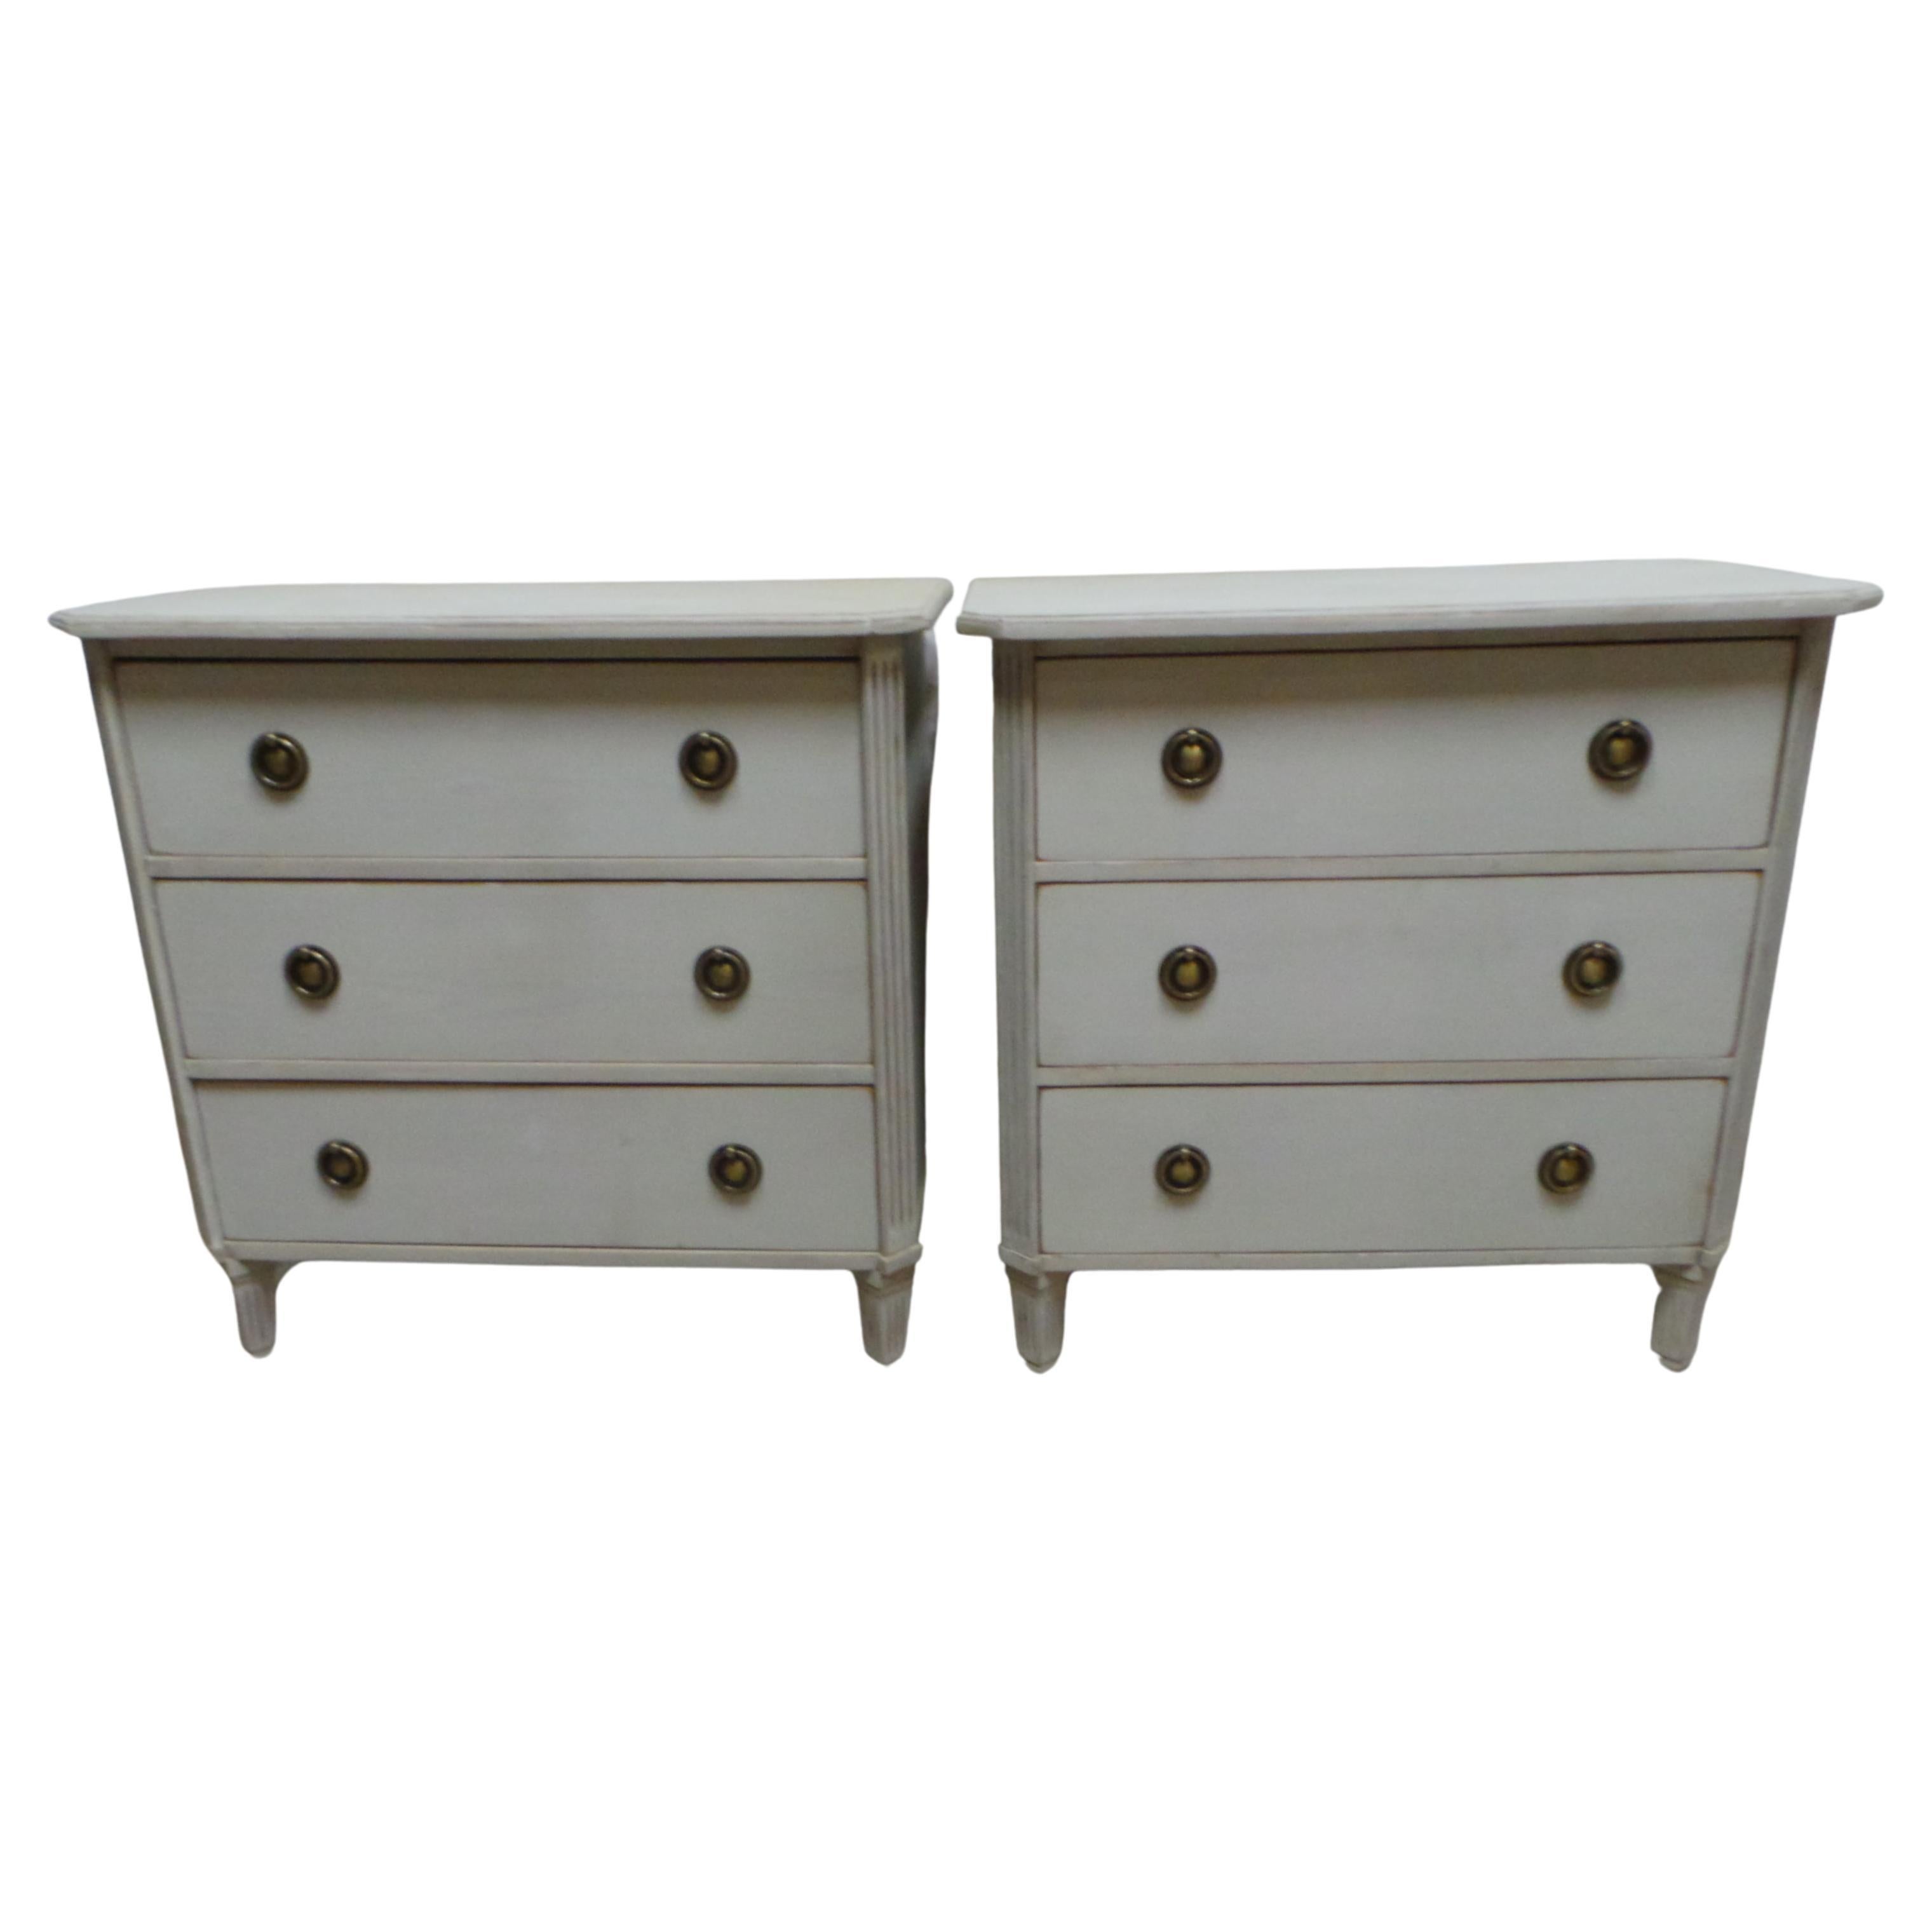 2 Swedish Gustavian Style 3 Drawer Chest Of Drawers